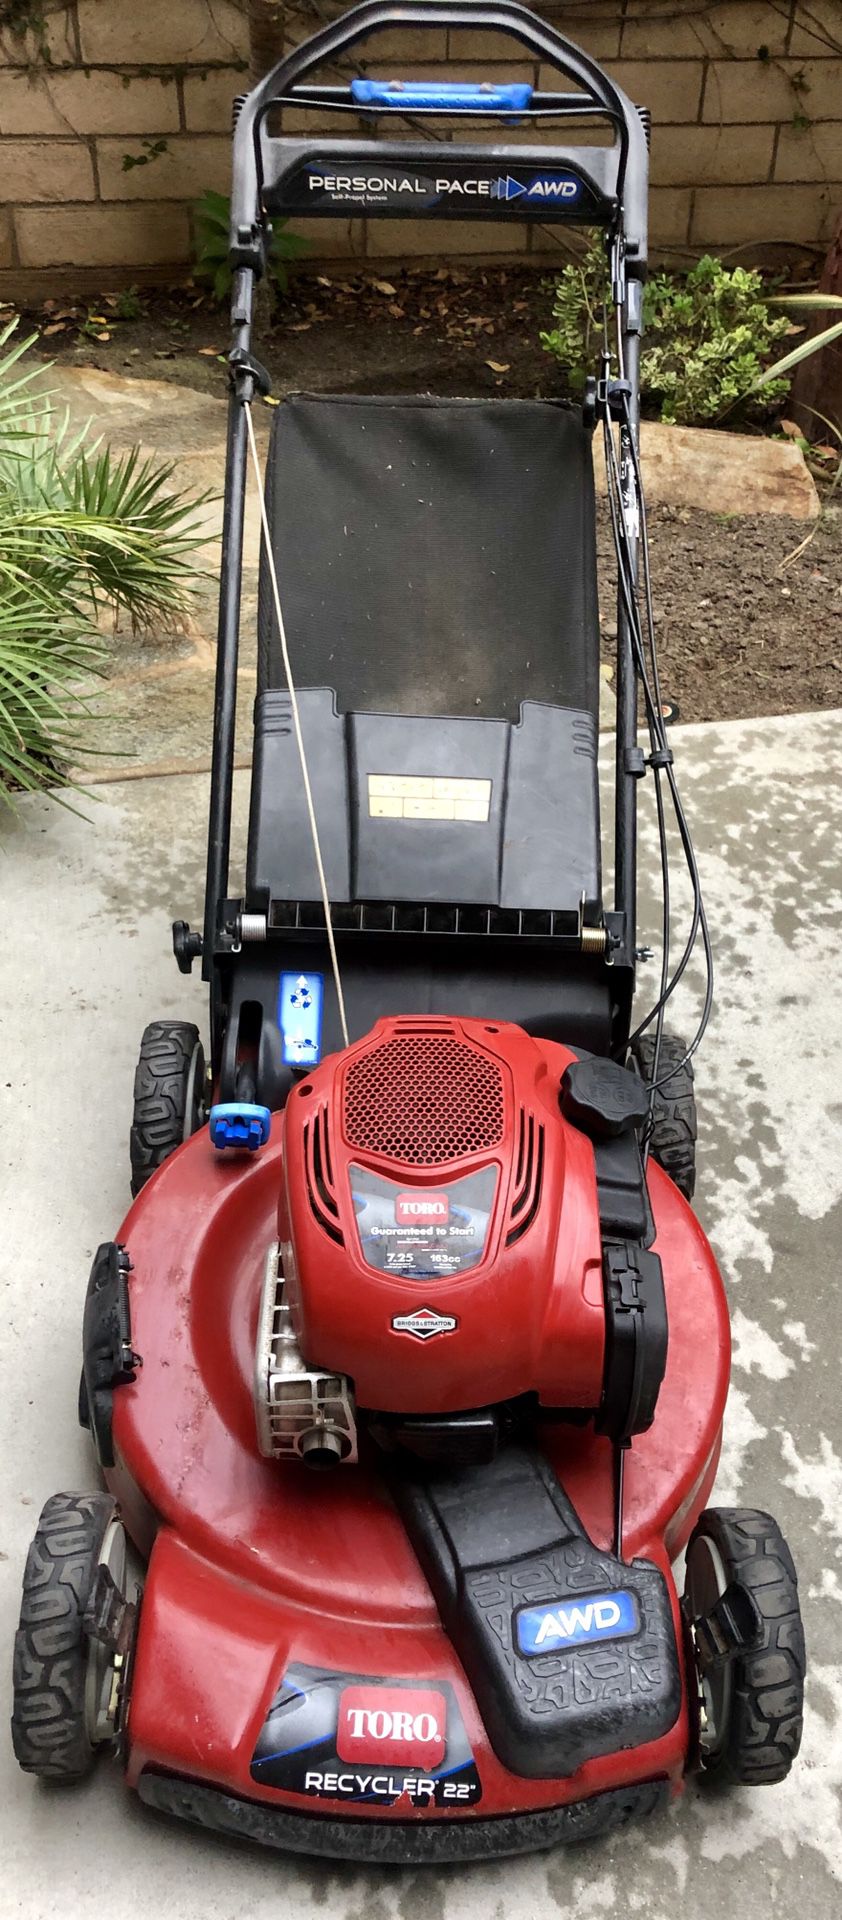 Lawn mower toro self propelled AWD personal pace great condition